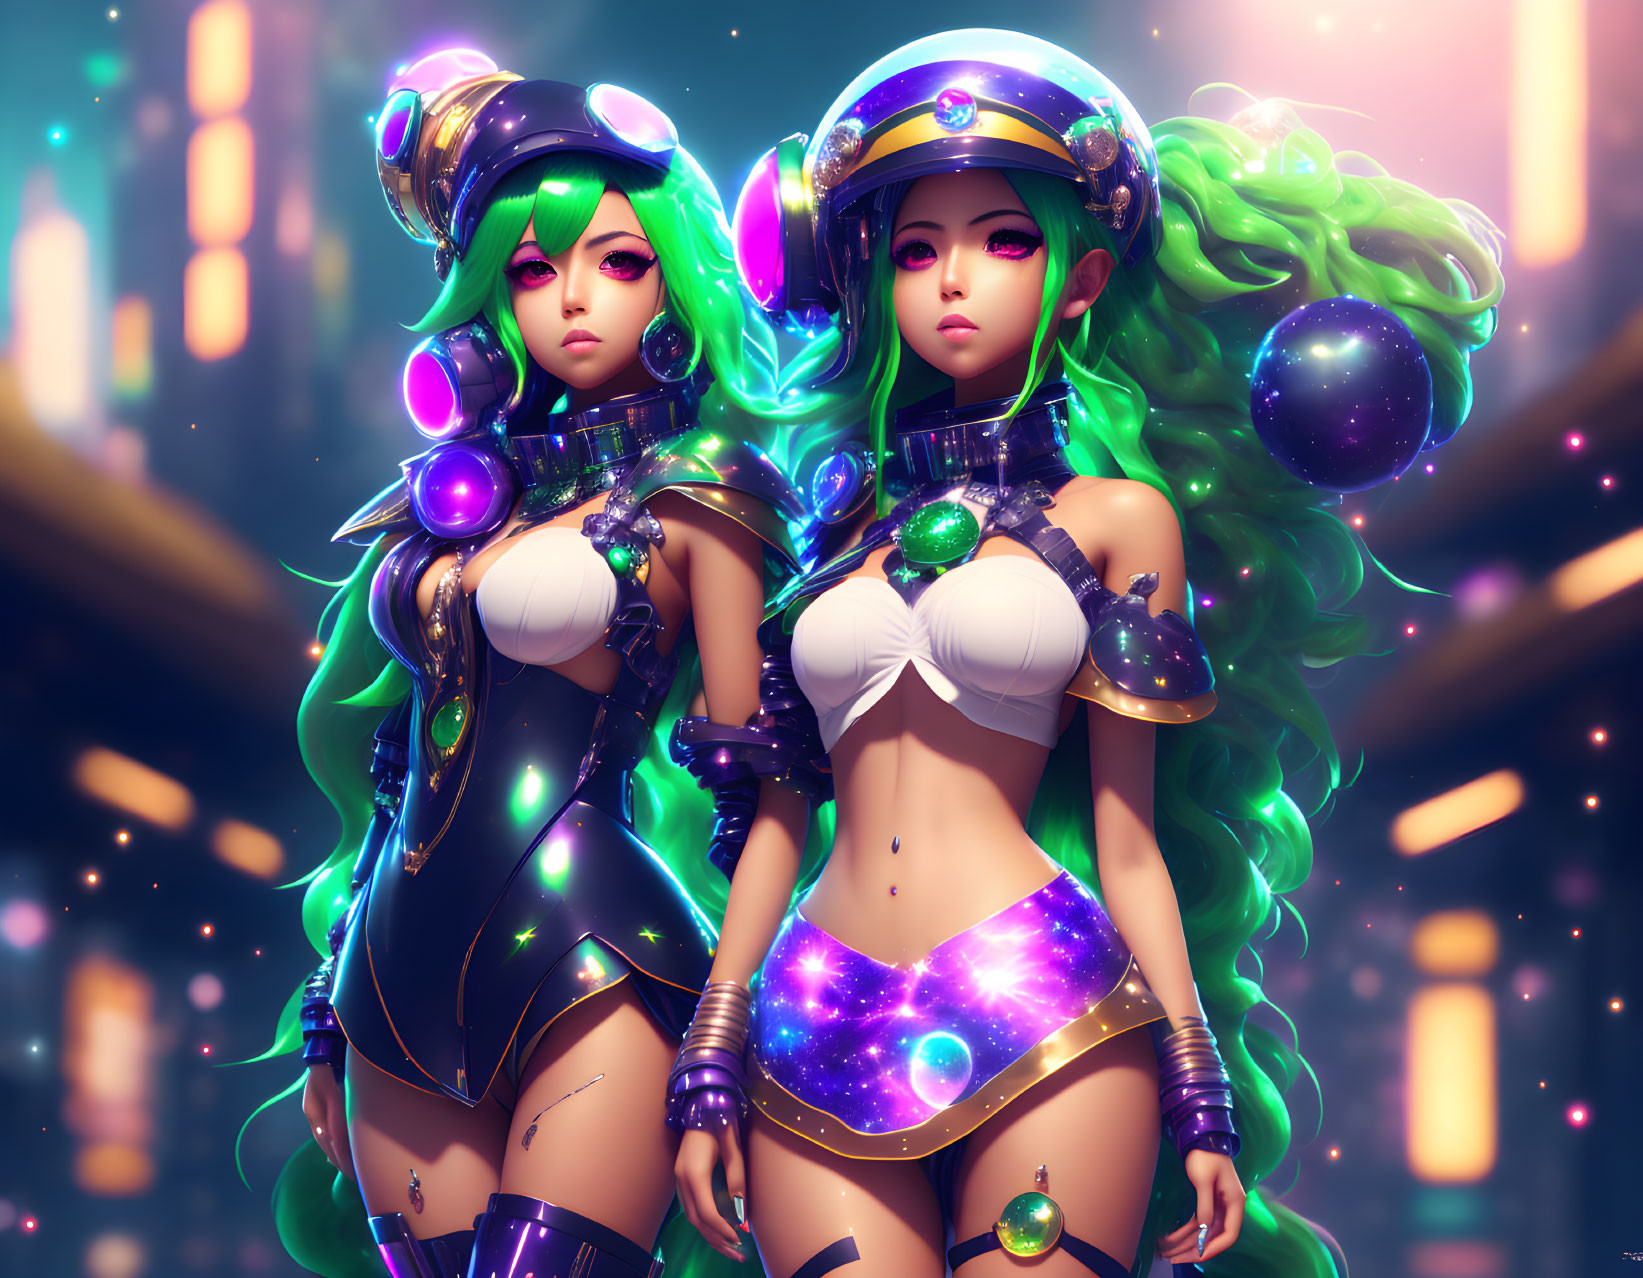 Stylized female characters with green hair in cosmic outfits and neon lights.